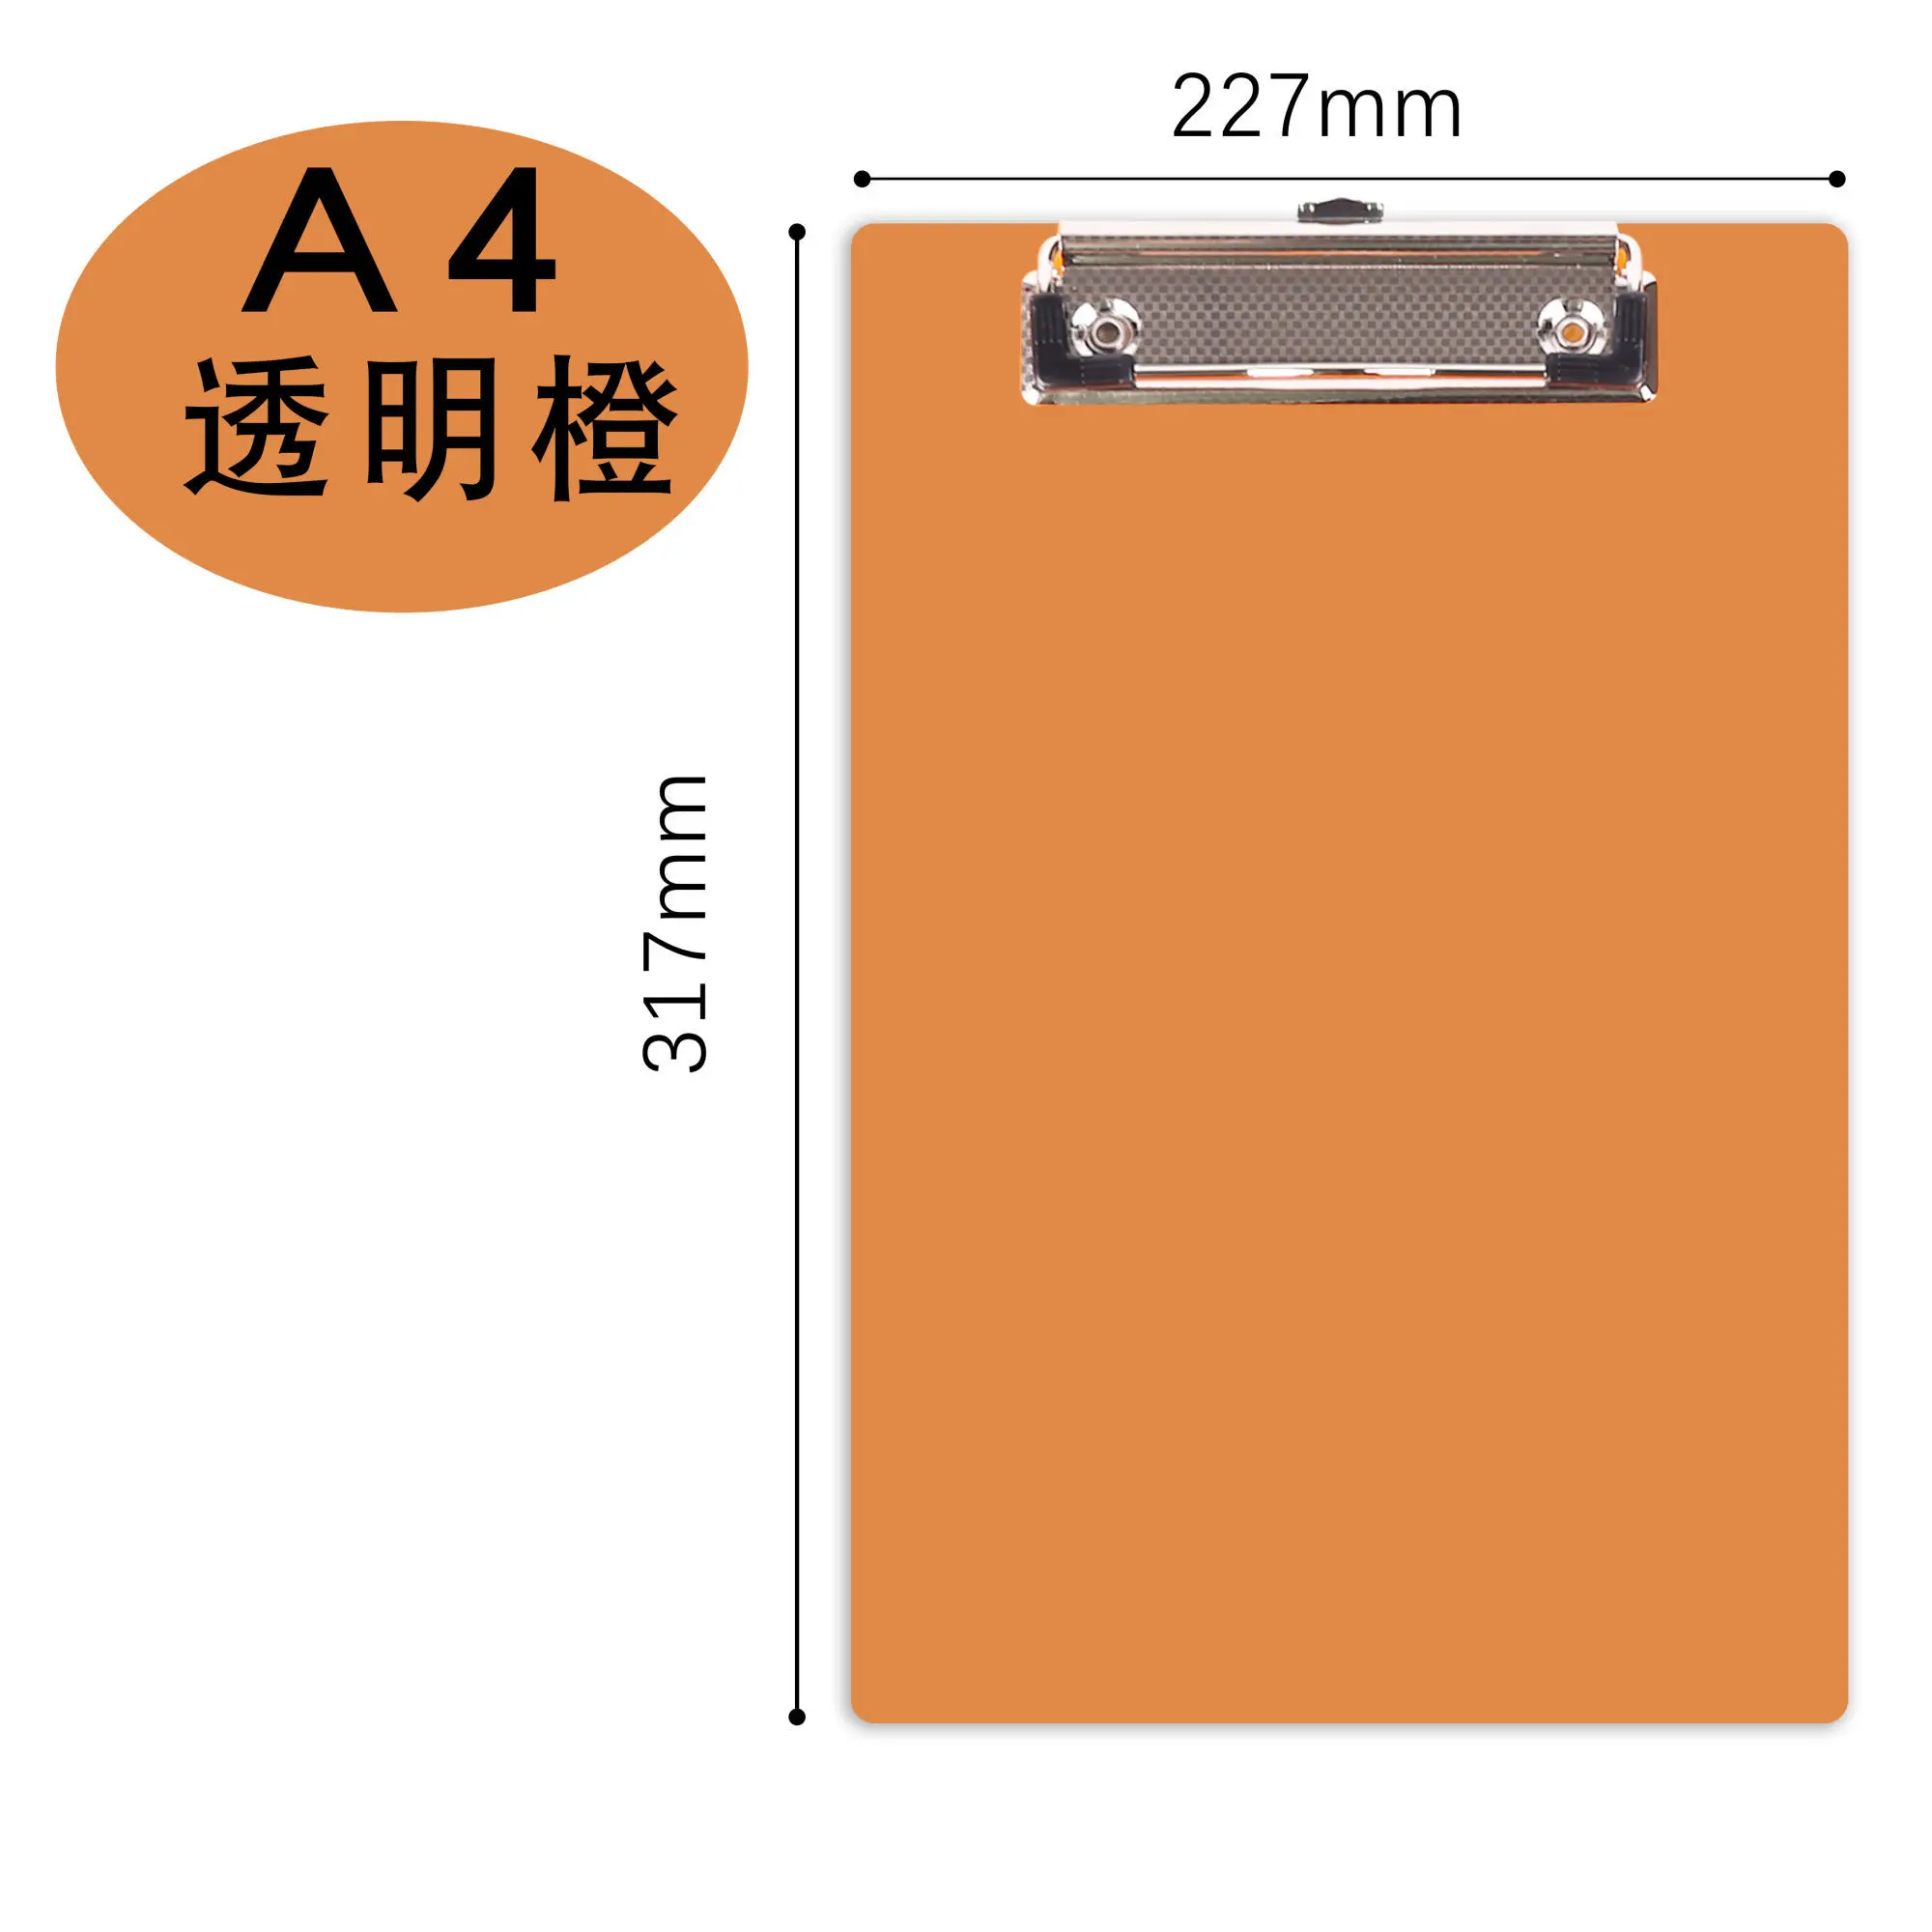 A4 Single Clip Folder For Documents Writing Board Clip Thickened Multifunctional Student Office Stationery Signing Writing Board learning stationery board clip a4 folder hard board information plywood folder single clip office supplies writing pad clip